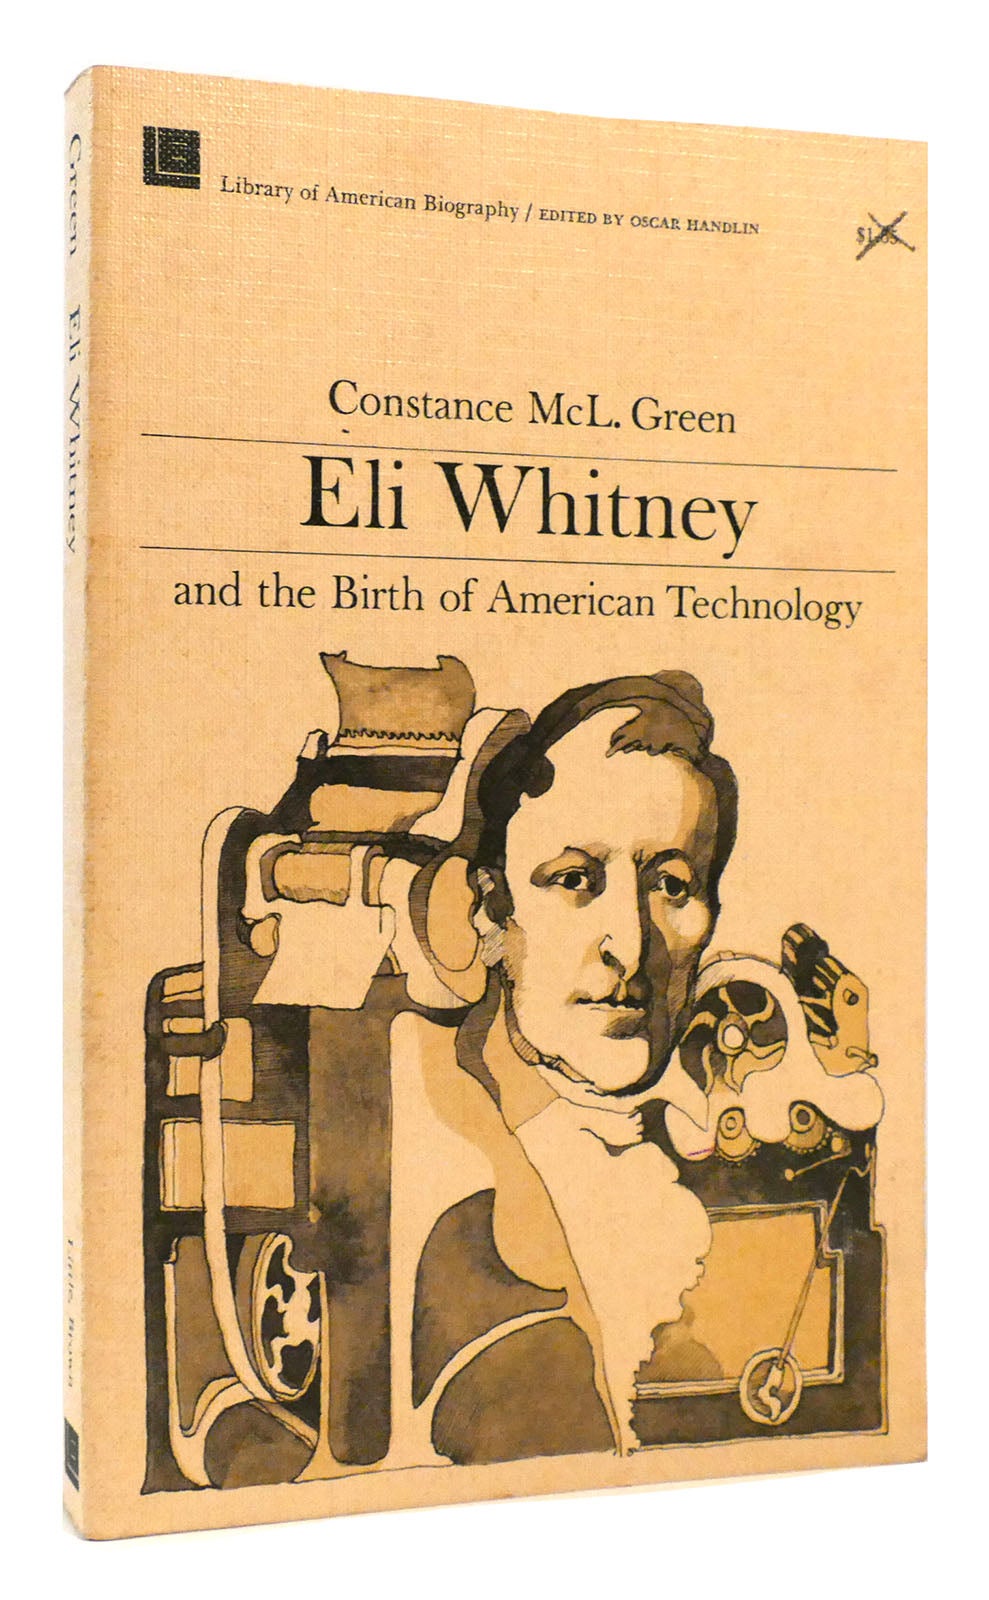 ELI WHITNEY AND THE BIRTH OF AMERICAN TECHNOLOGY | Constance McL. Green ...